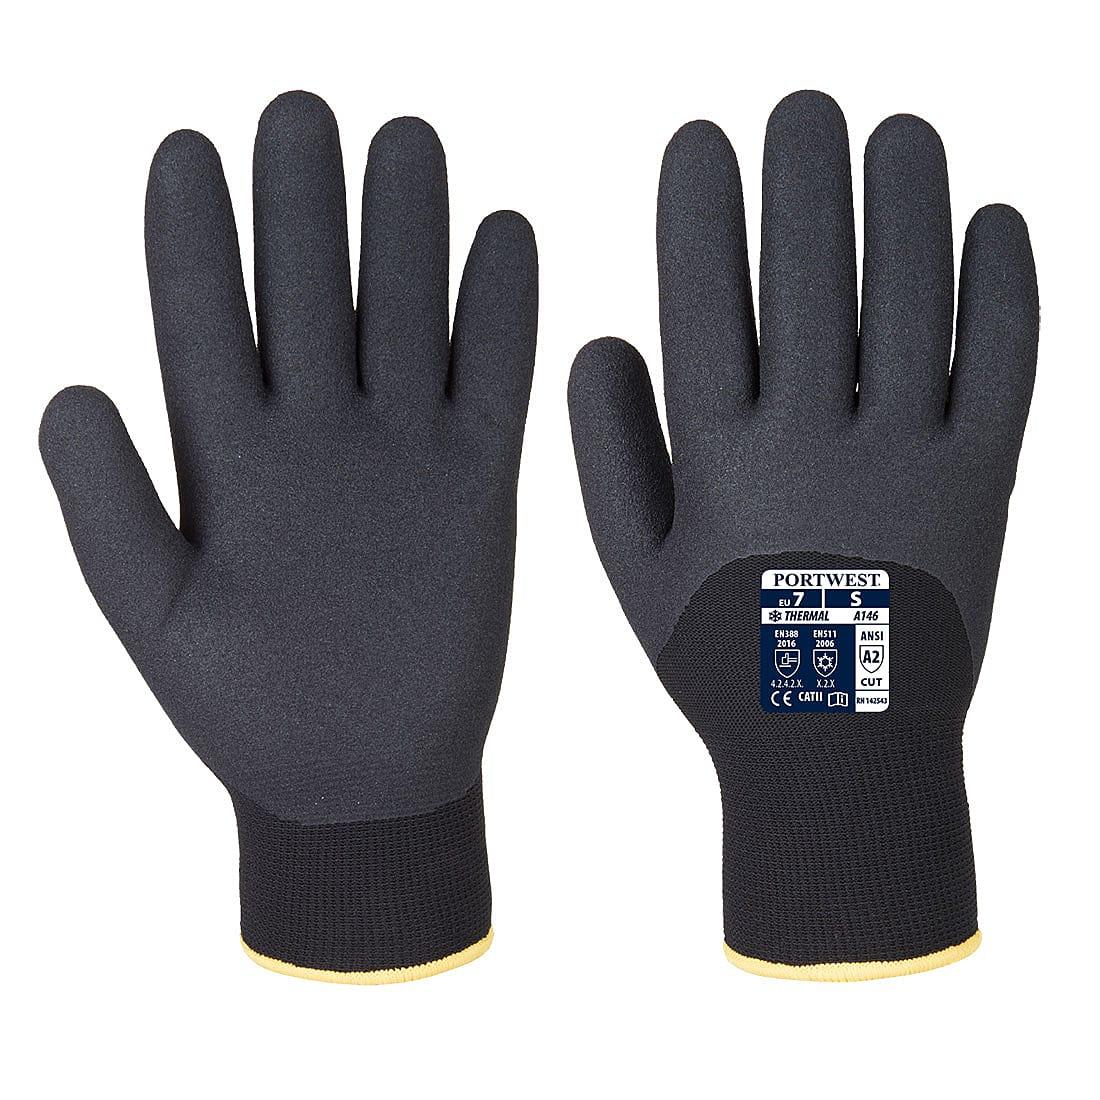 Portwest Arctic Winter Gloves in Black (Product Code: A146)